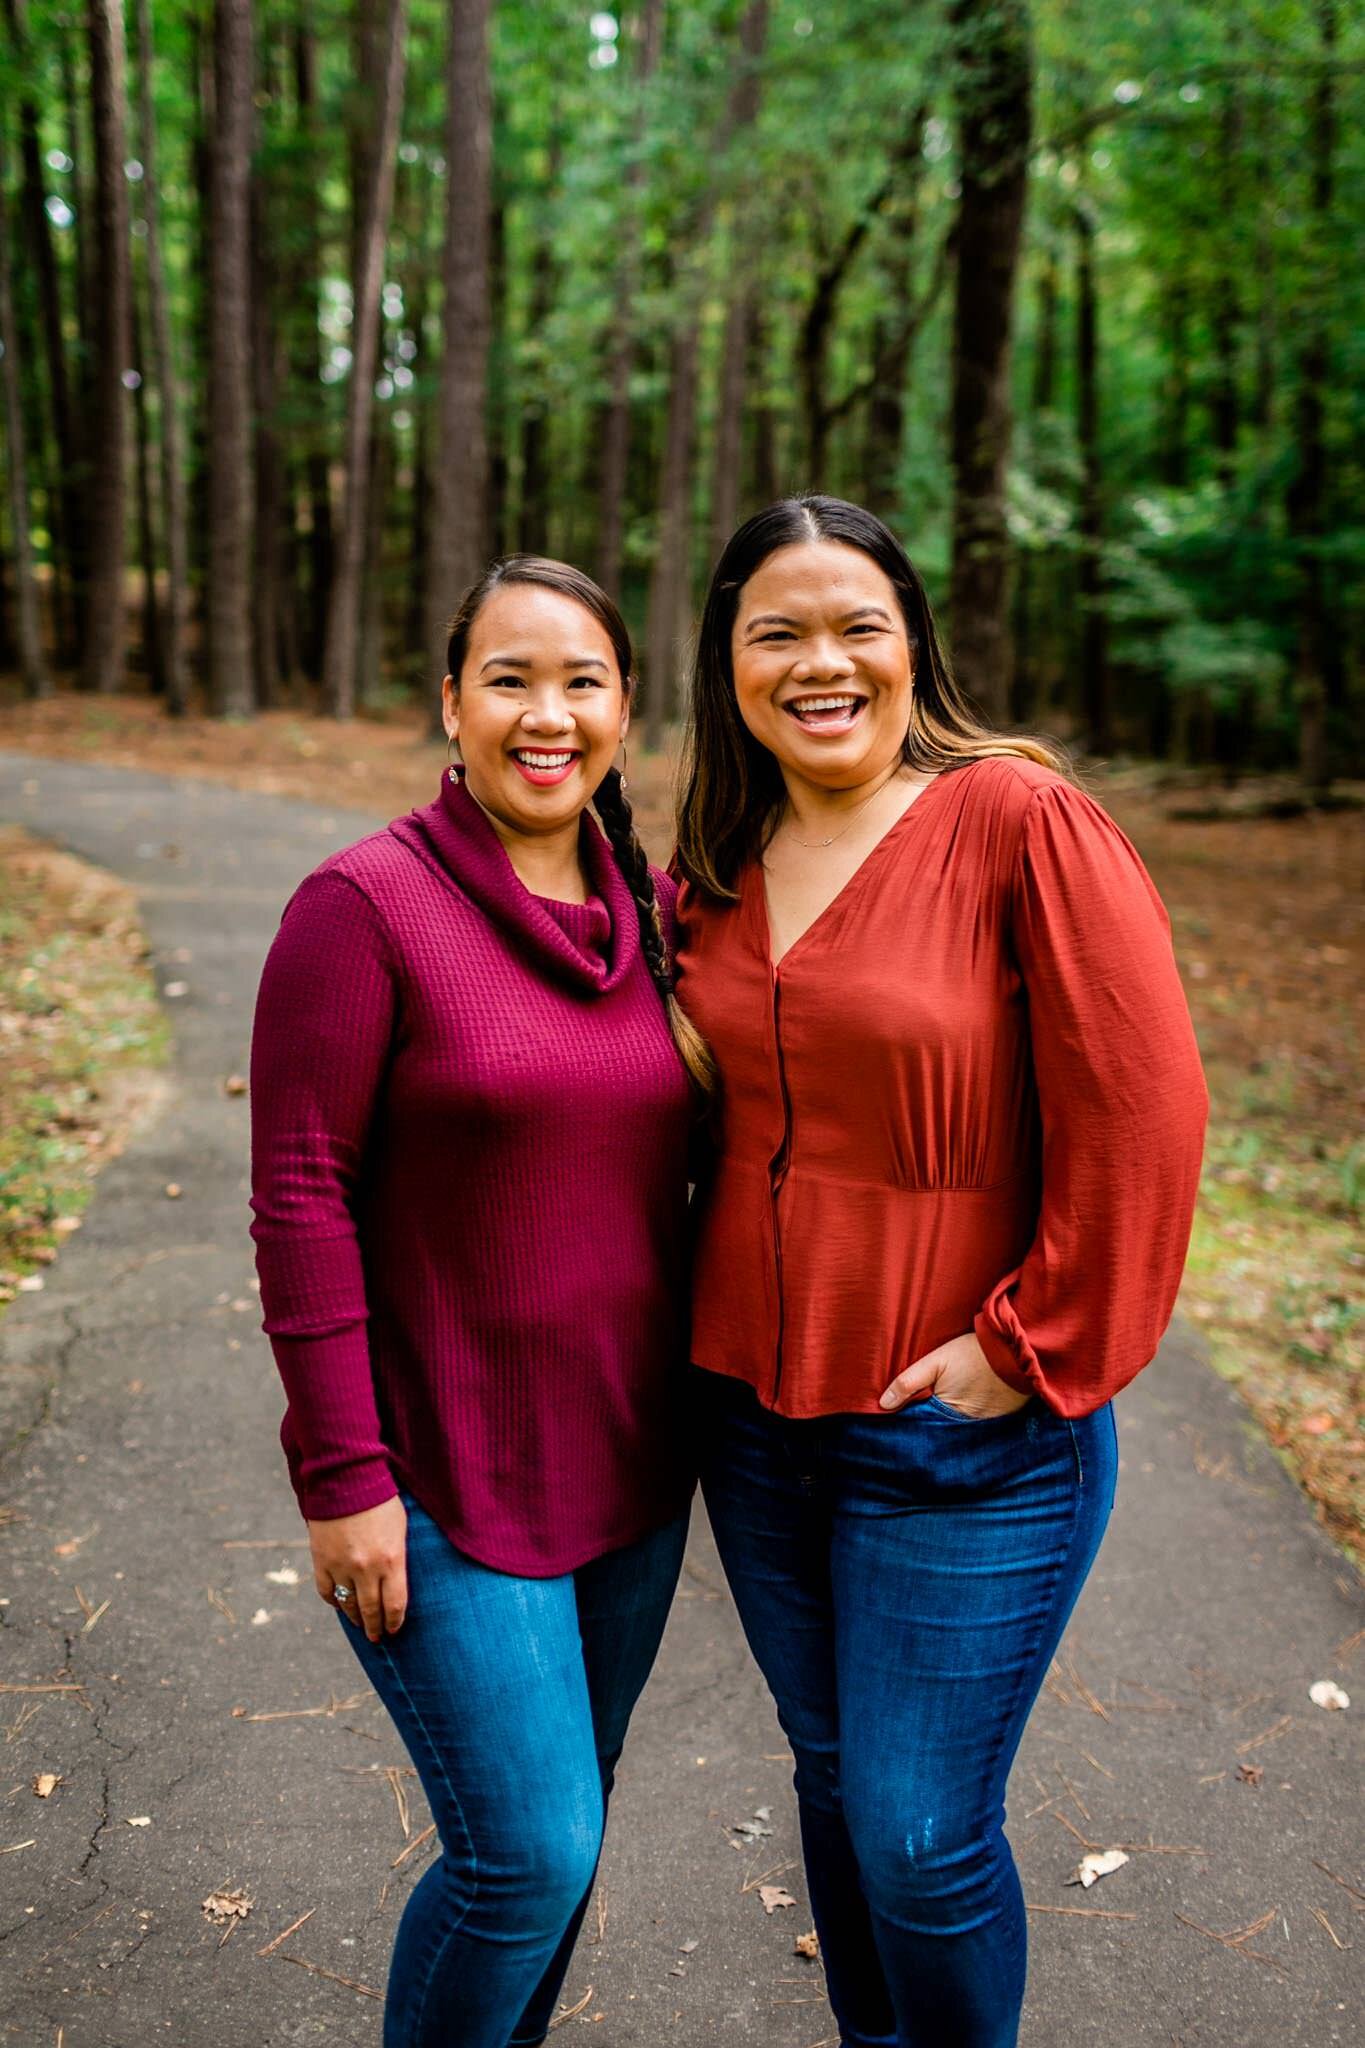 Raleigh Family Photographer | By G. Lin Photography | Umstead Park | Candid photo of two sisters